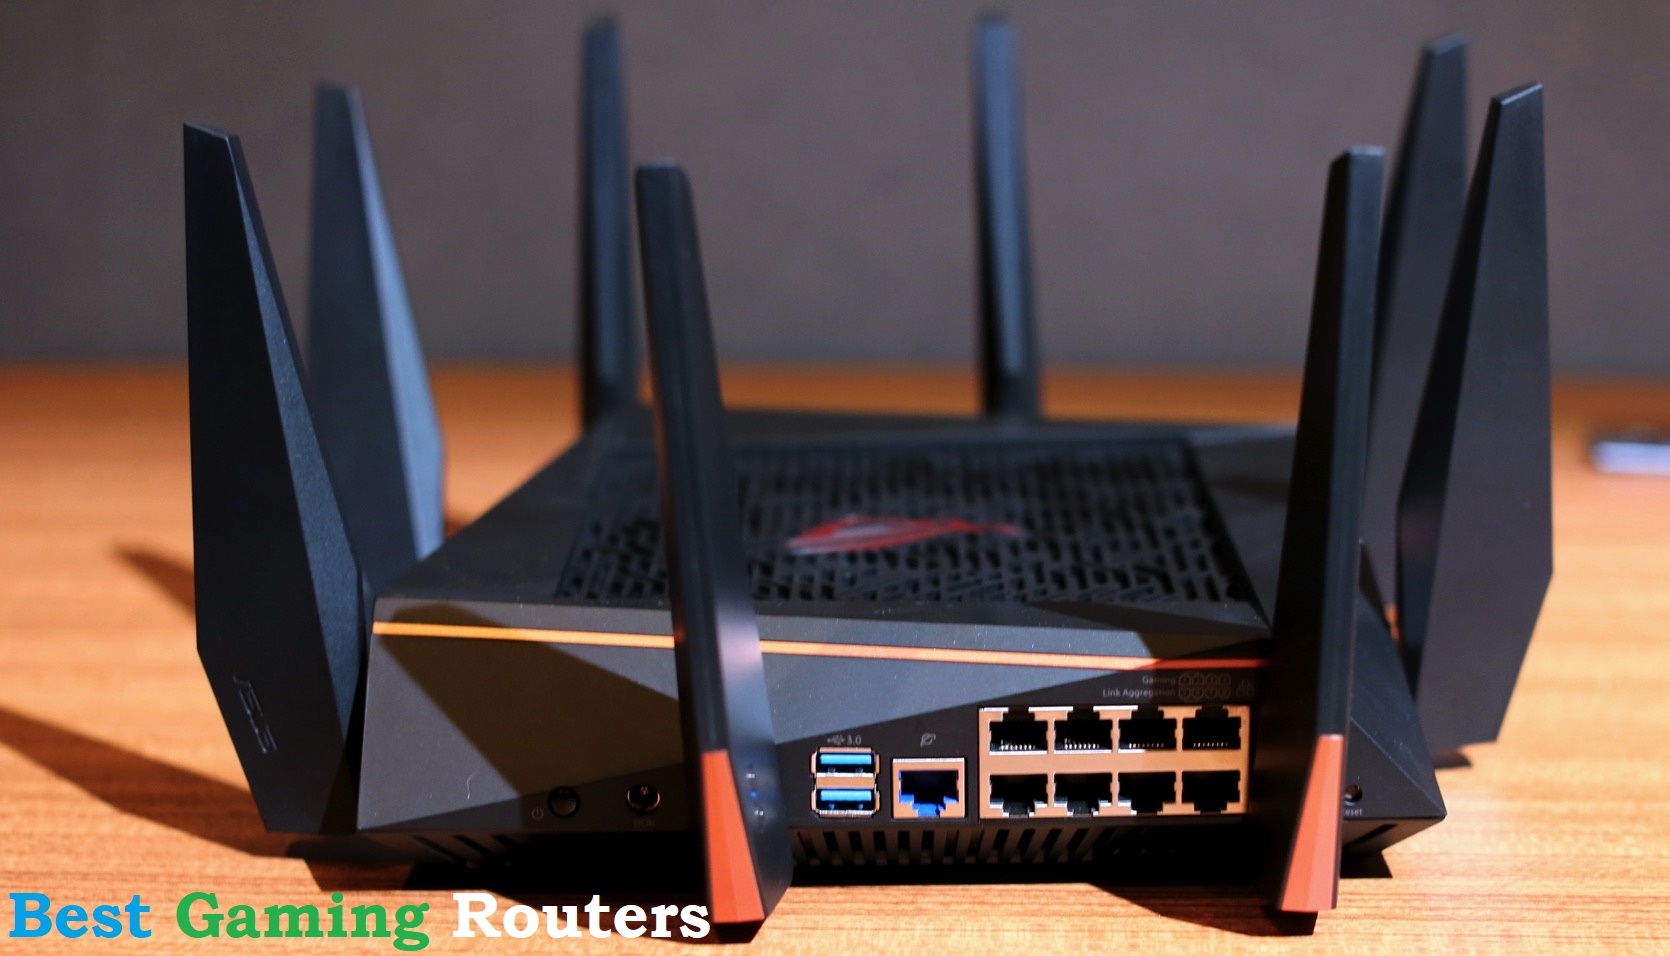 Top 5 gaming routers 2018